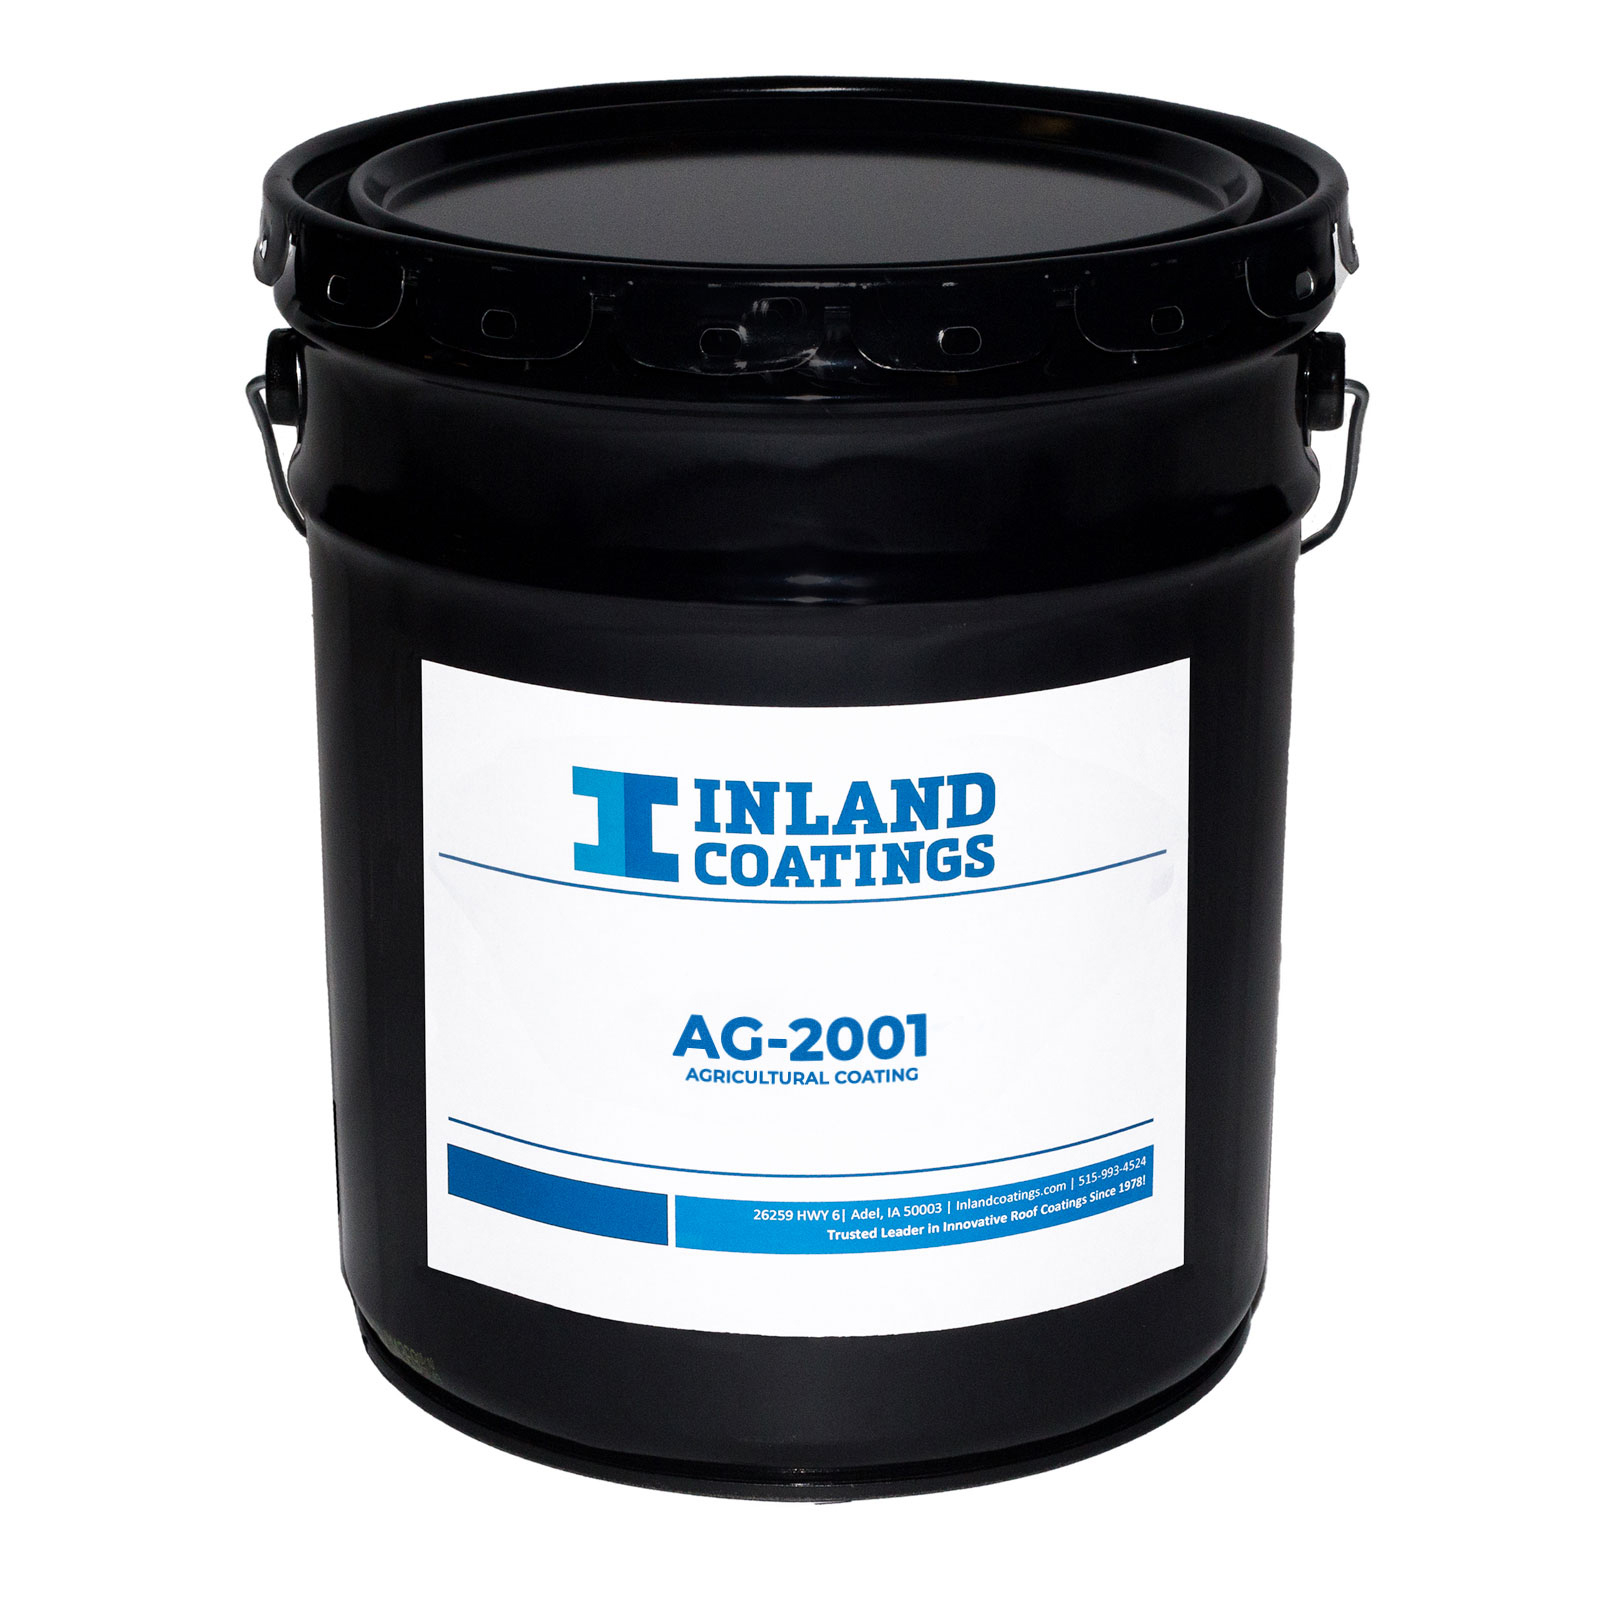 A bucket of Inland's AG-2001 Agricultural Coating